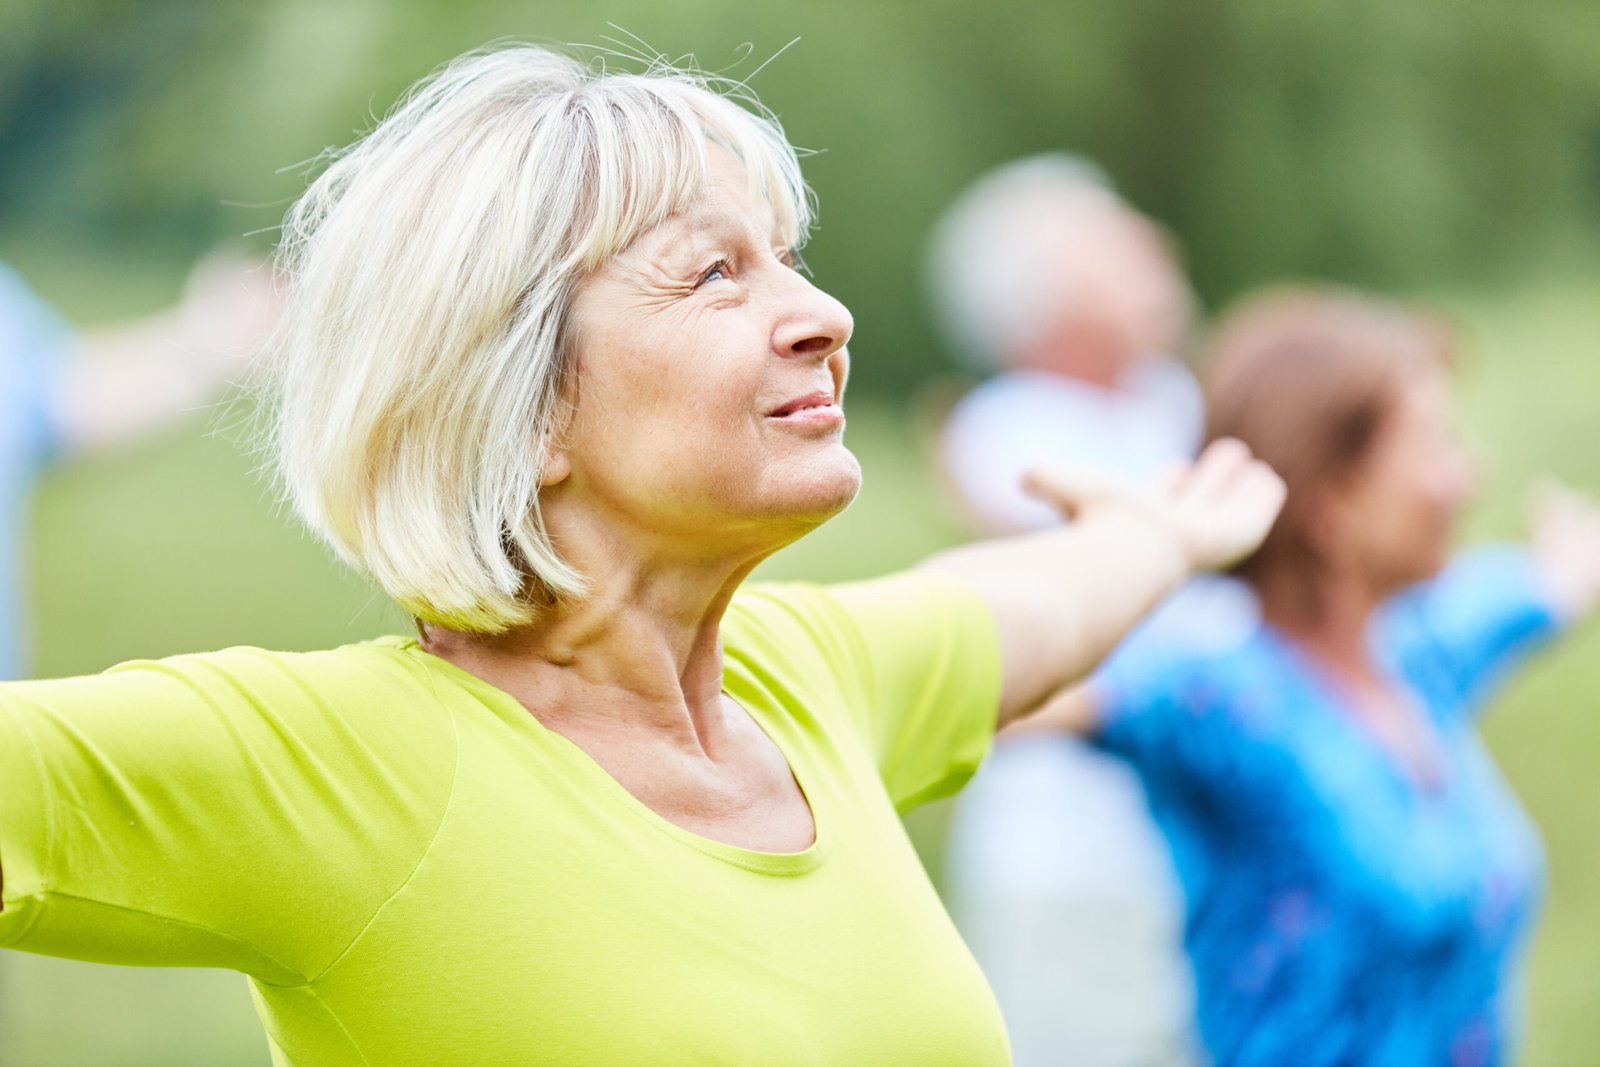 Community ‘club’ is a key magnet for older people to keep active